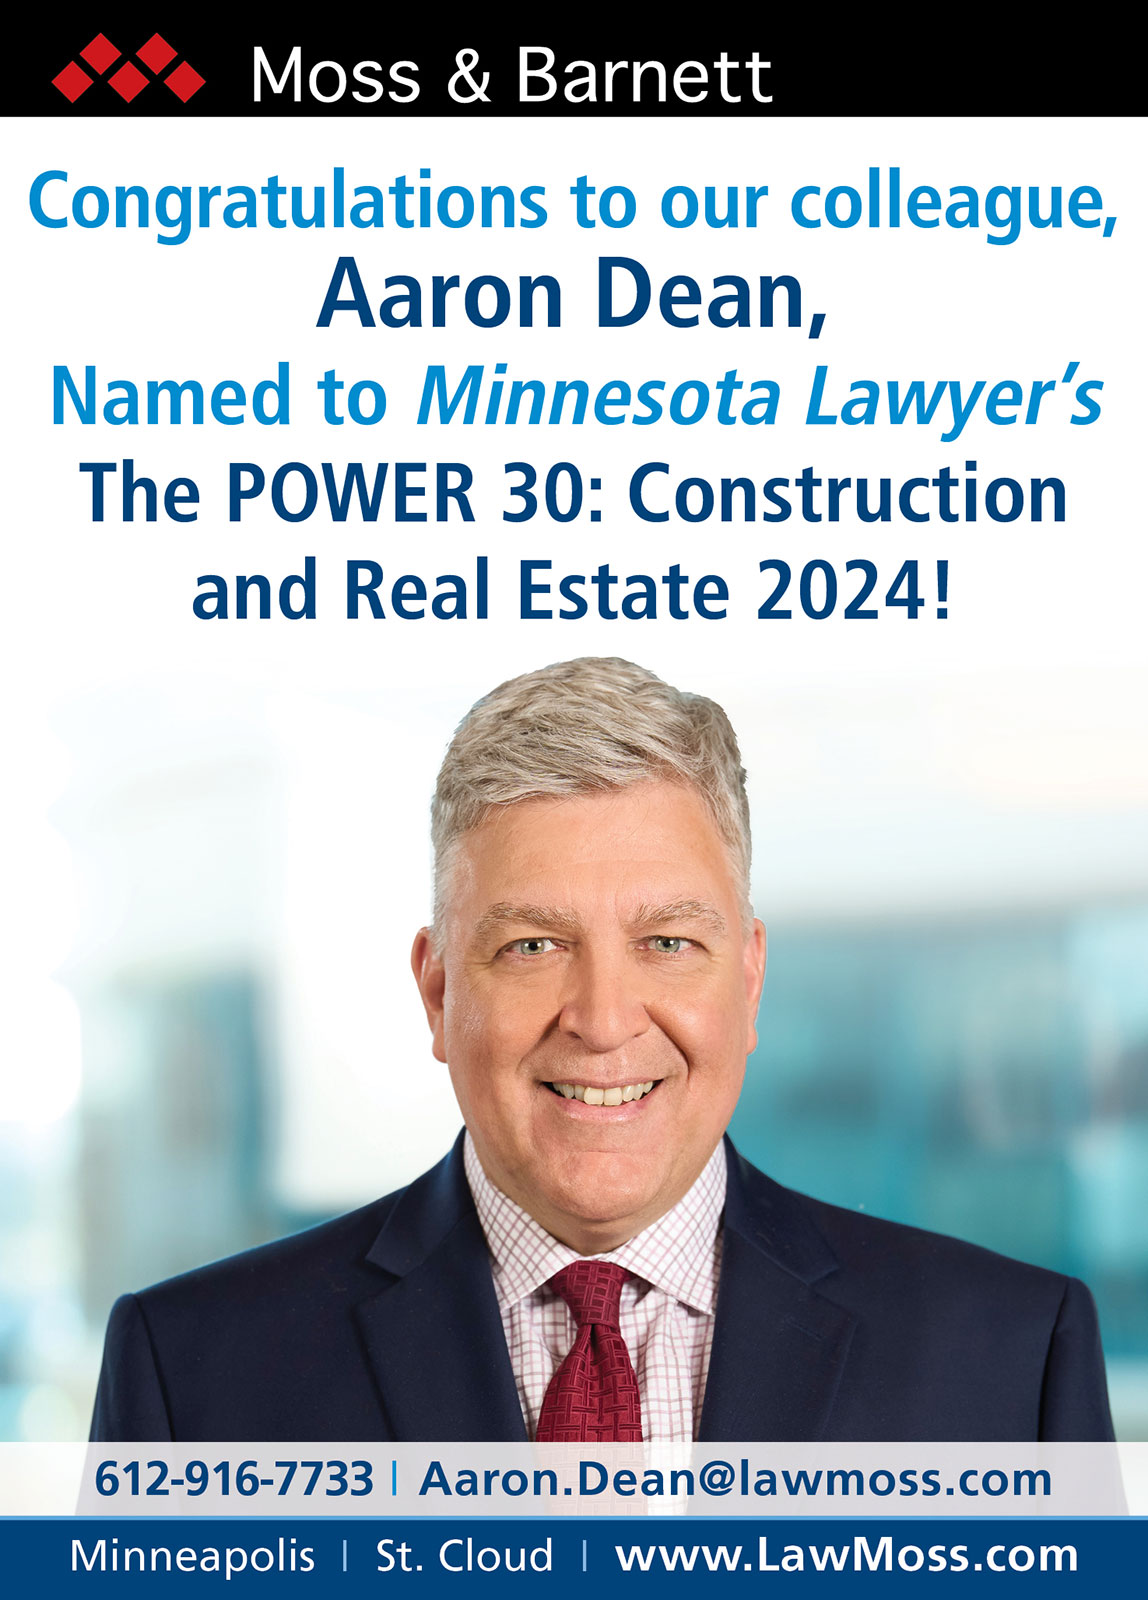 Aaron Dean selected to Minnesota Lawyer Power 30 for Construction Law